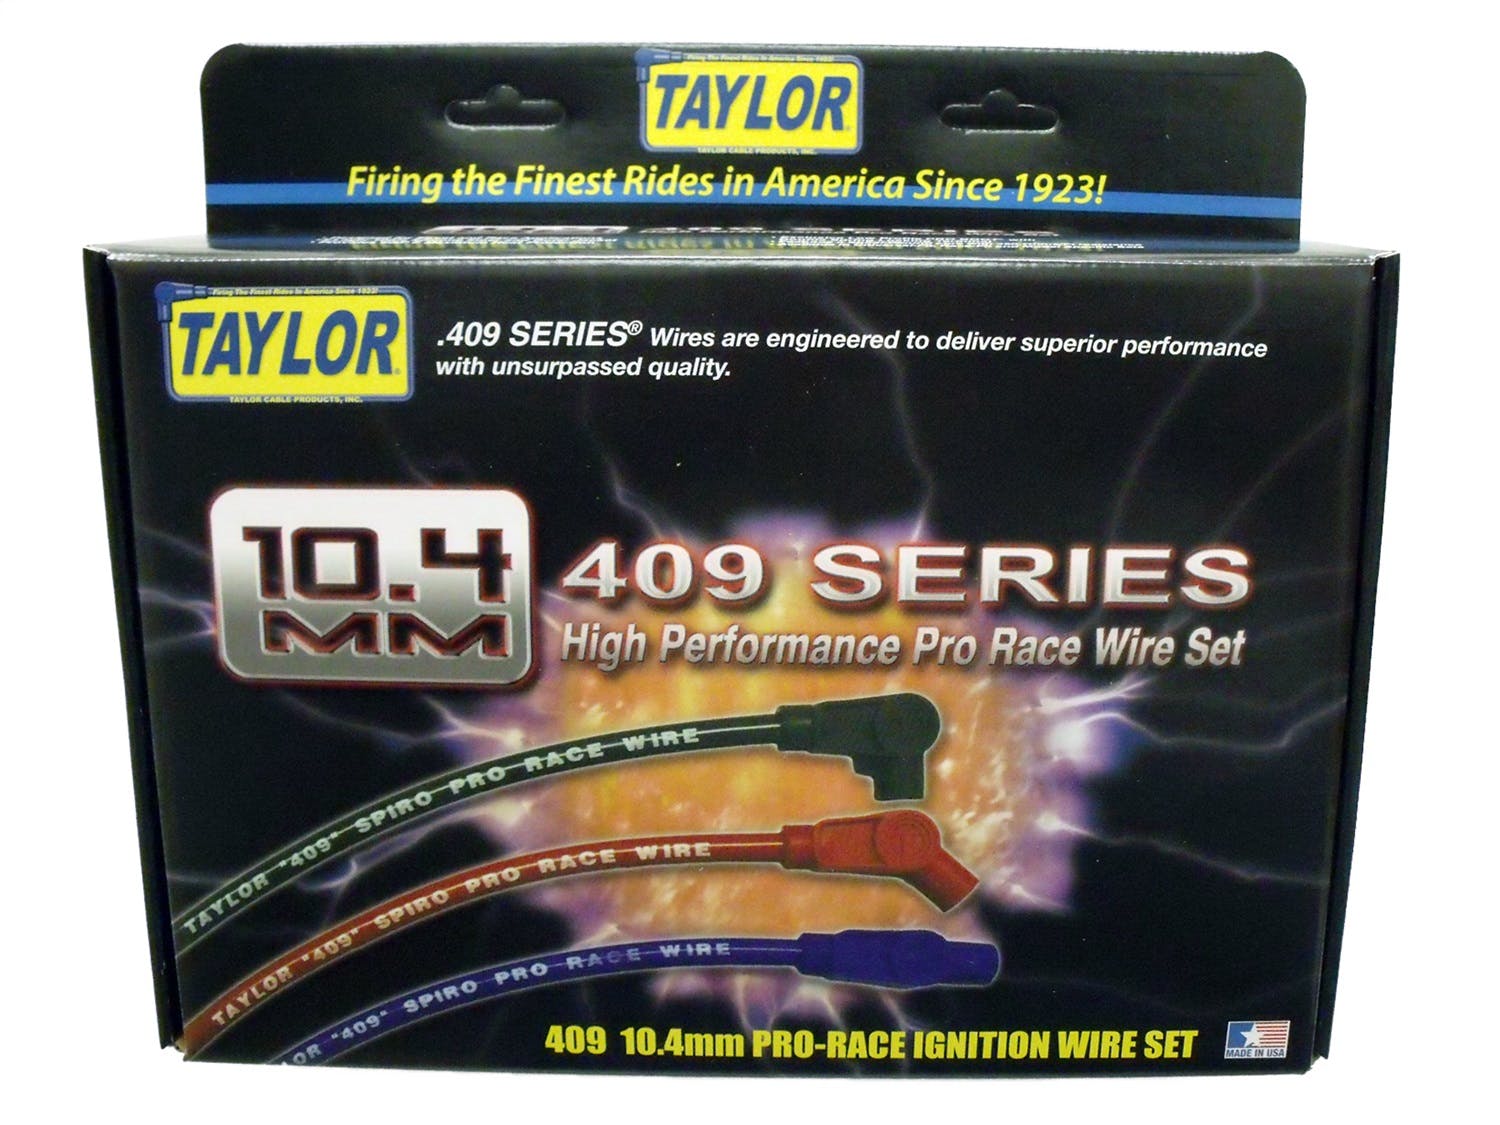 Taylor Cable Products 79055 409 Spiro-Pro univ 8 cyl 180 black